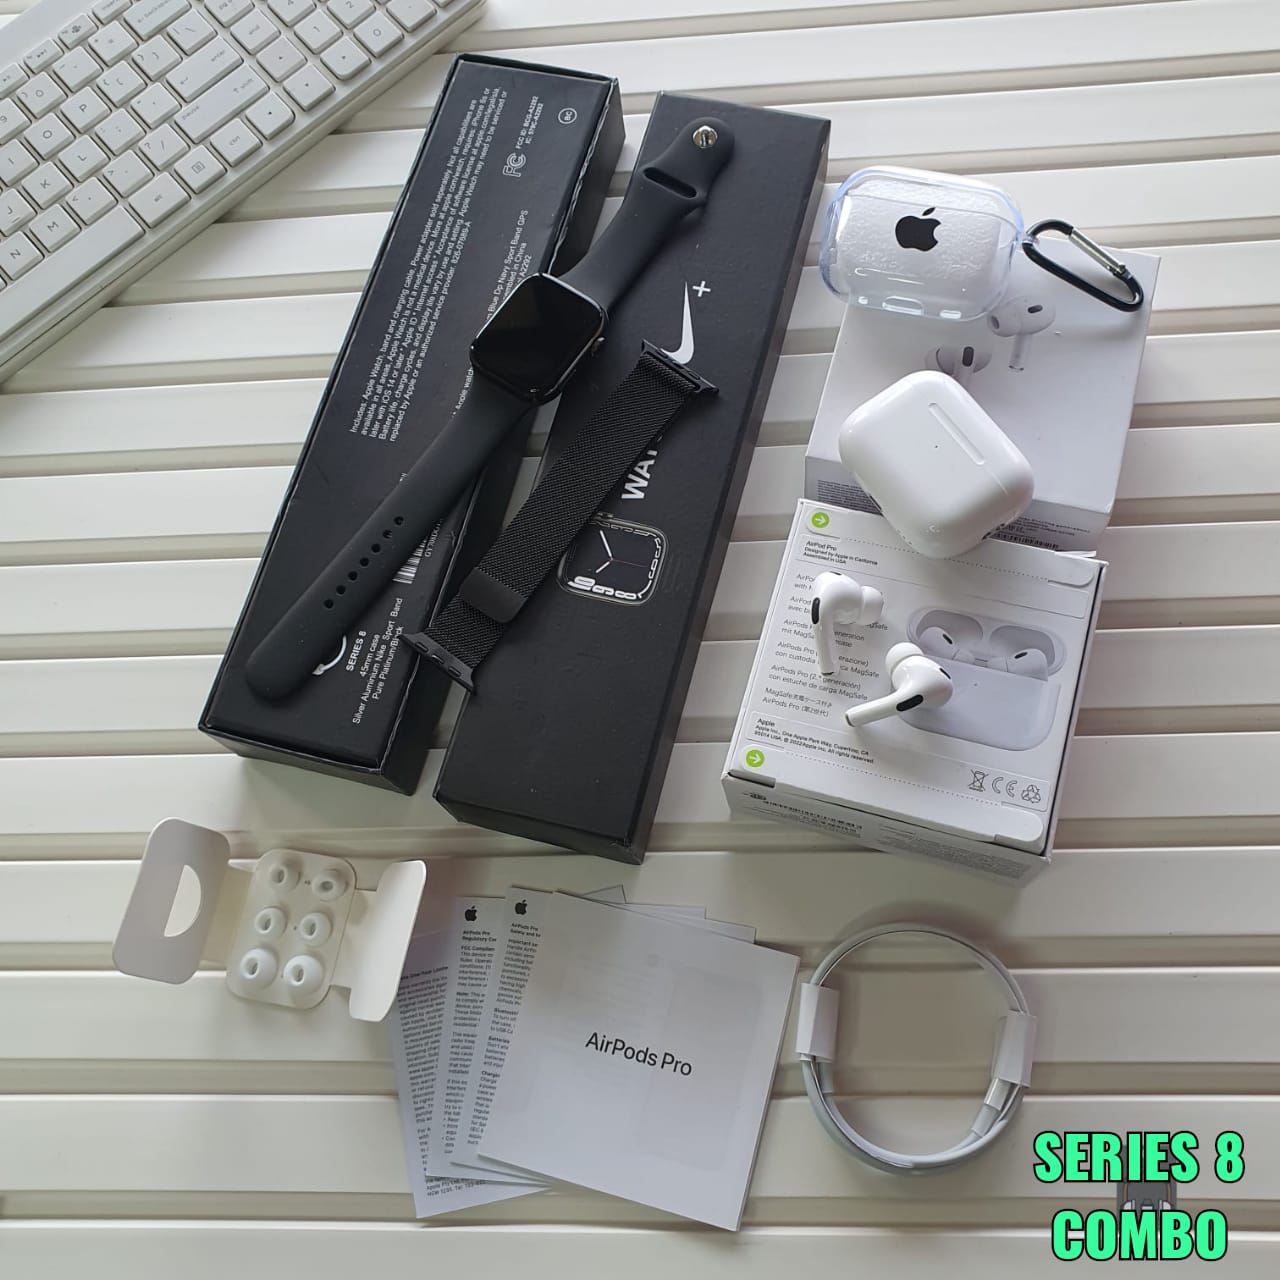 Series 8 combo including series 8 watch, earpods pro 2 with case and metal strap